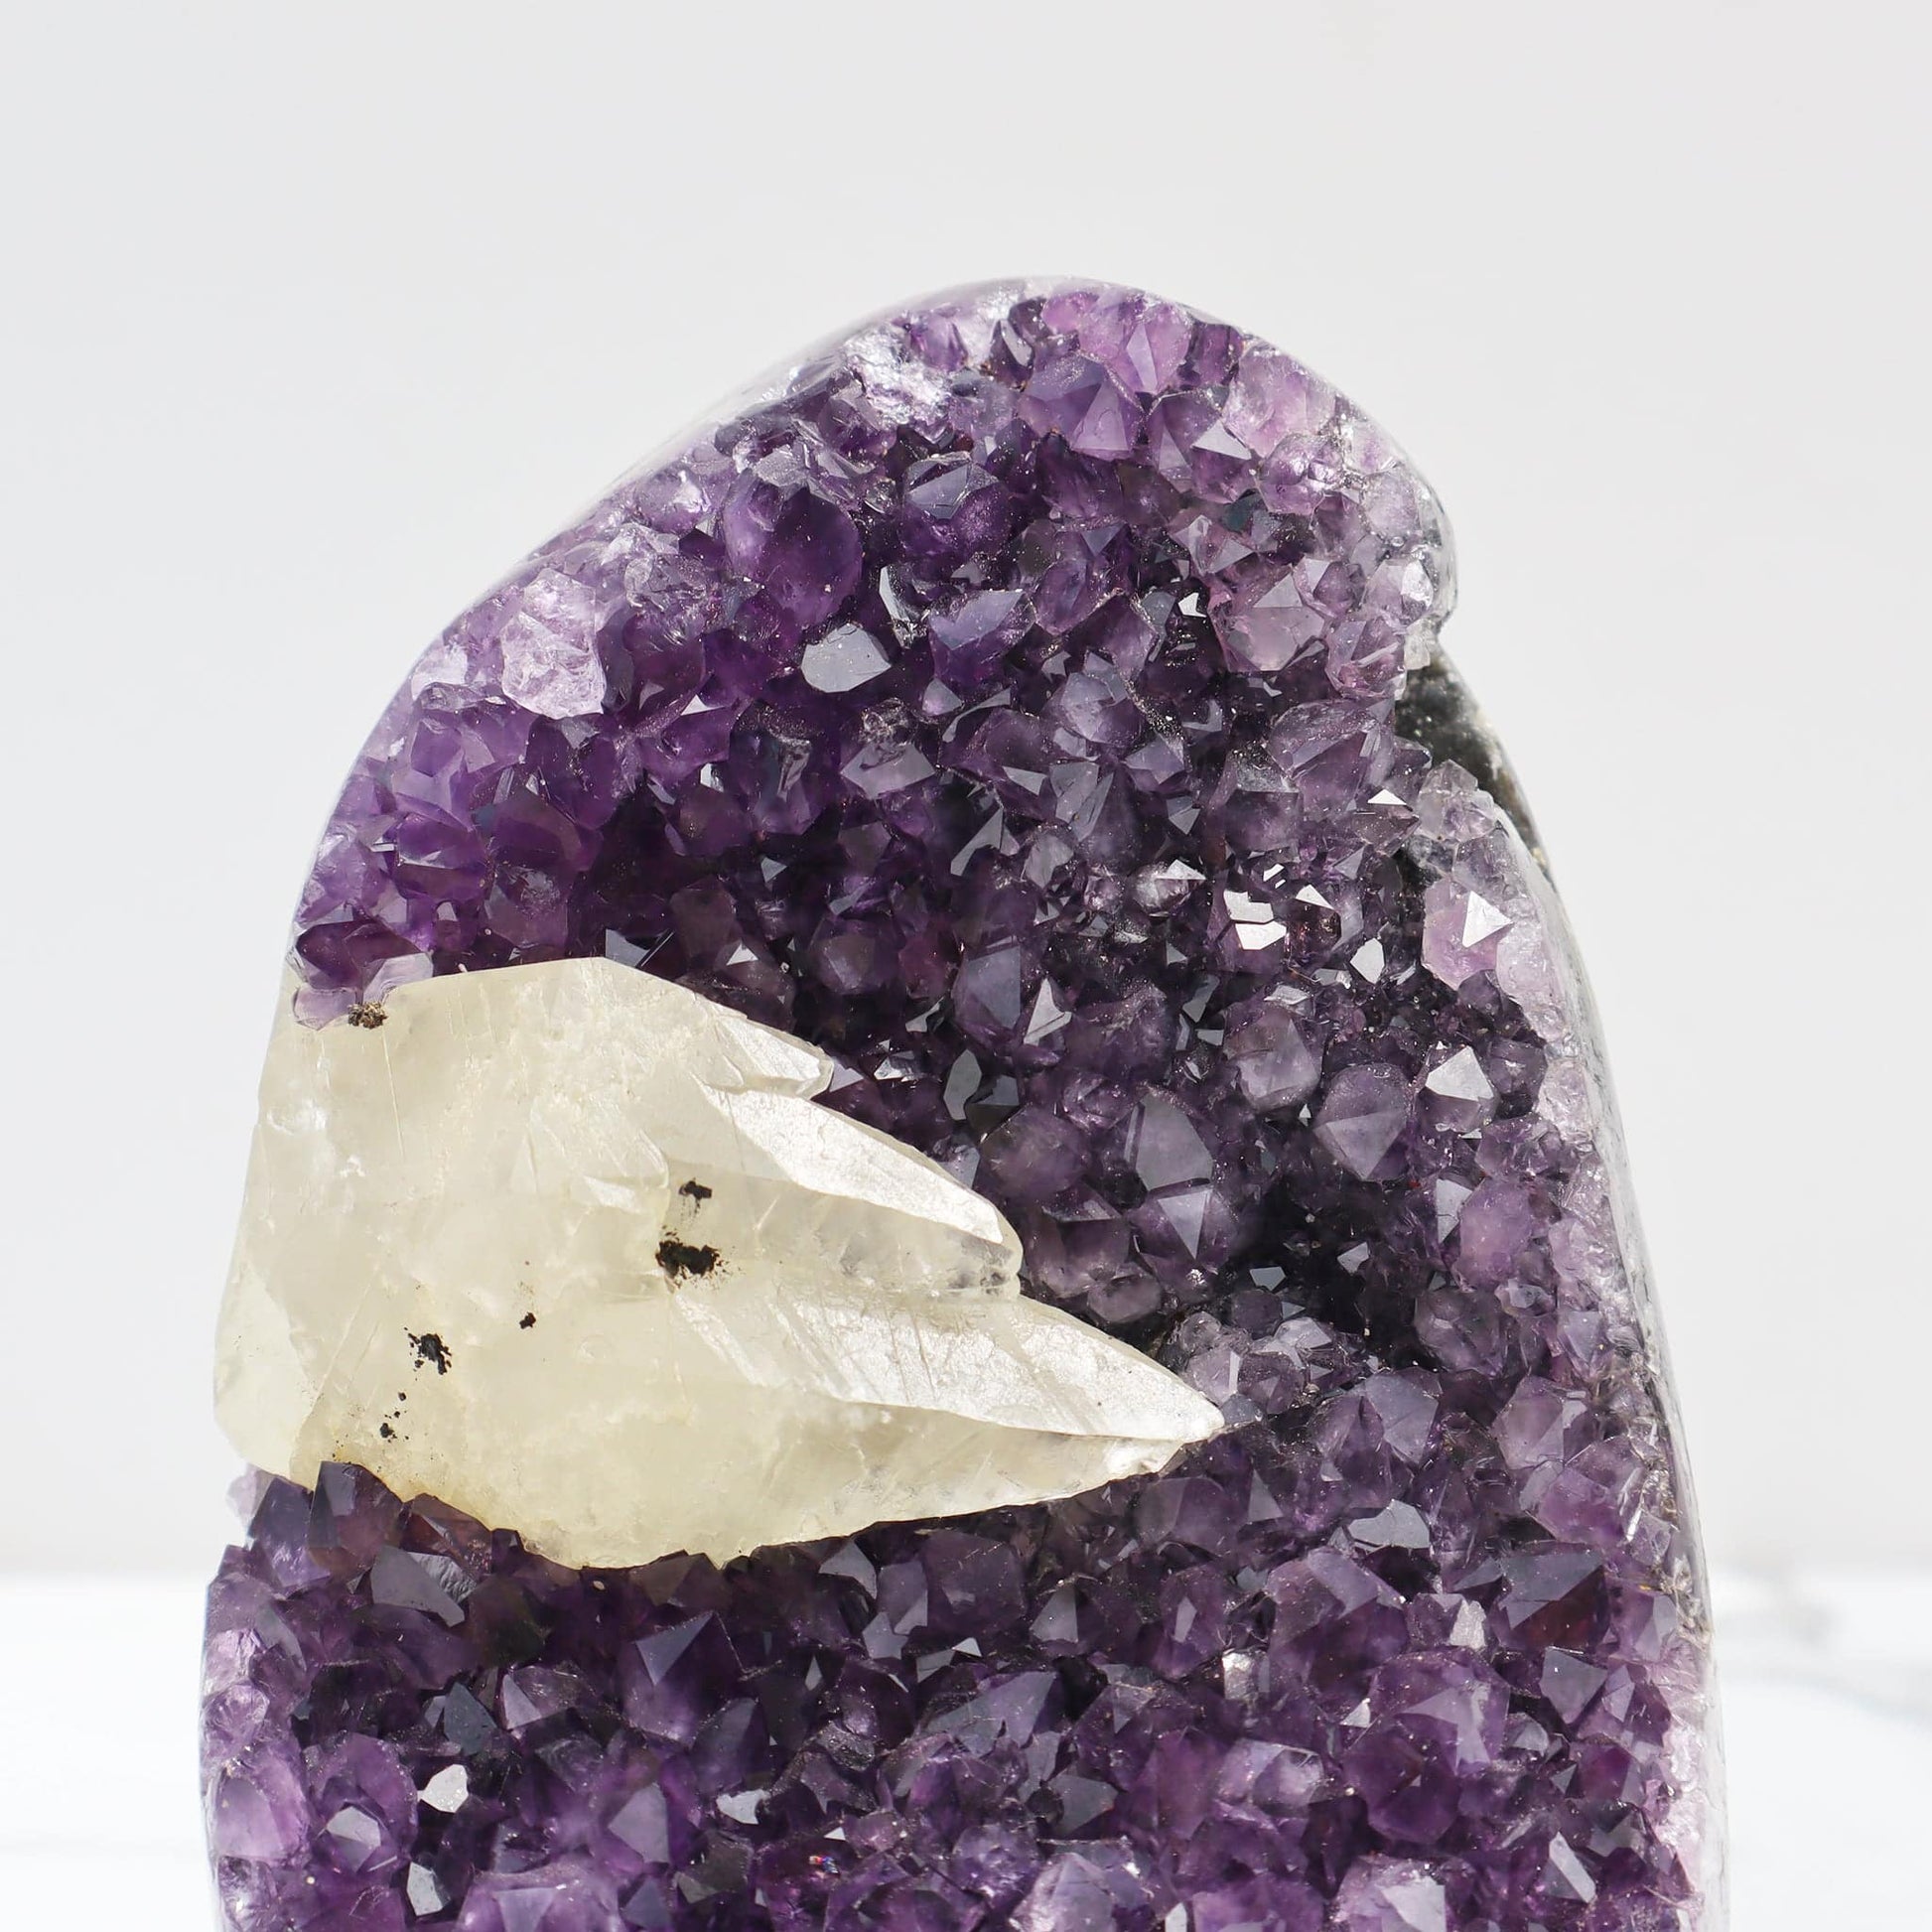 Unique geode amethyst large calcite - Deepest Earth